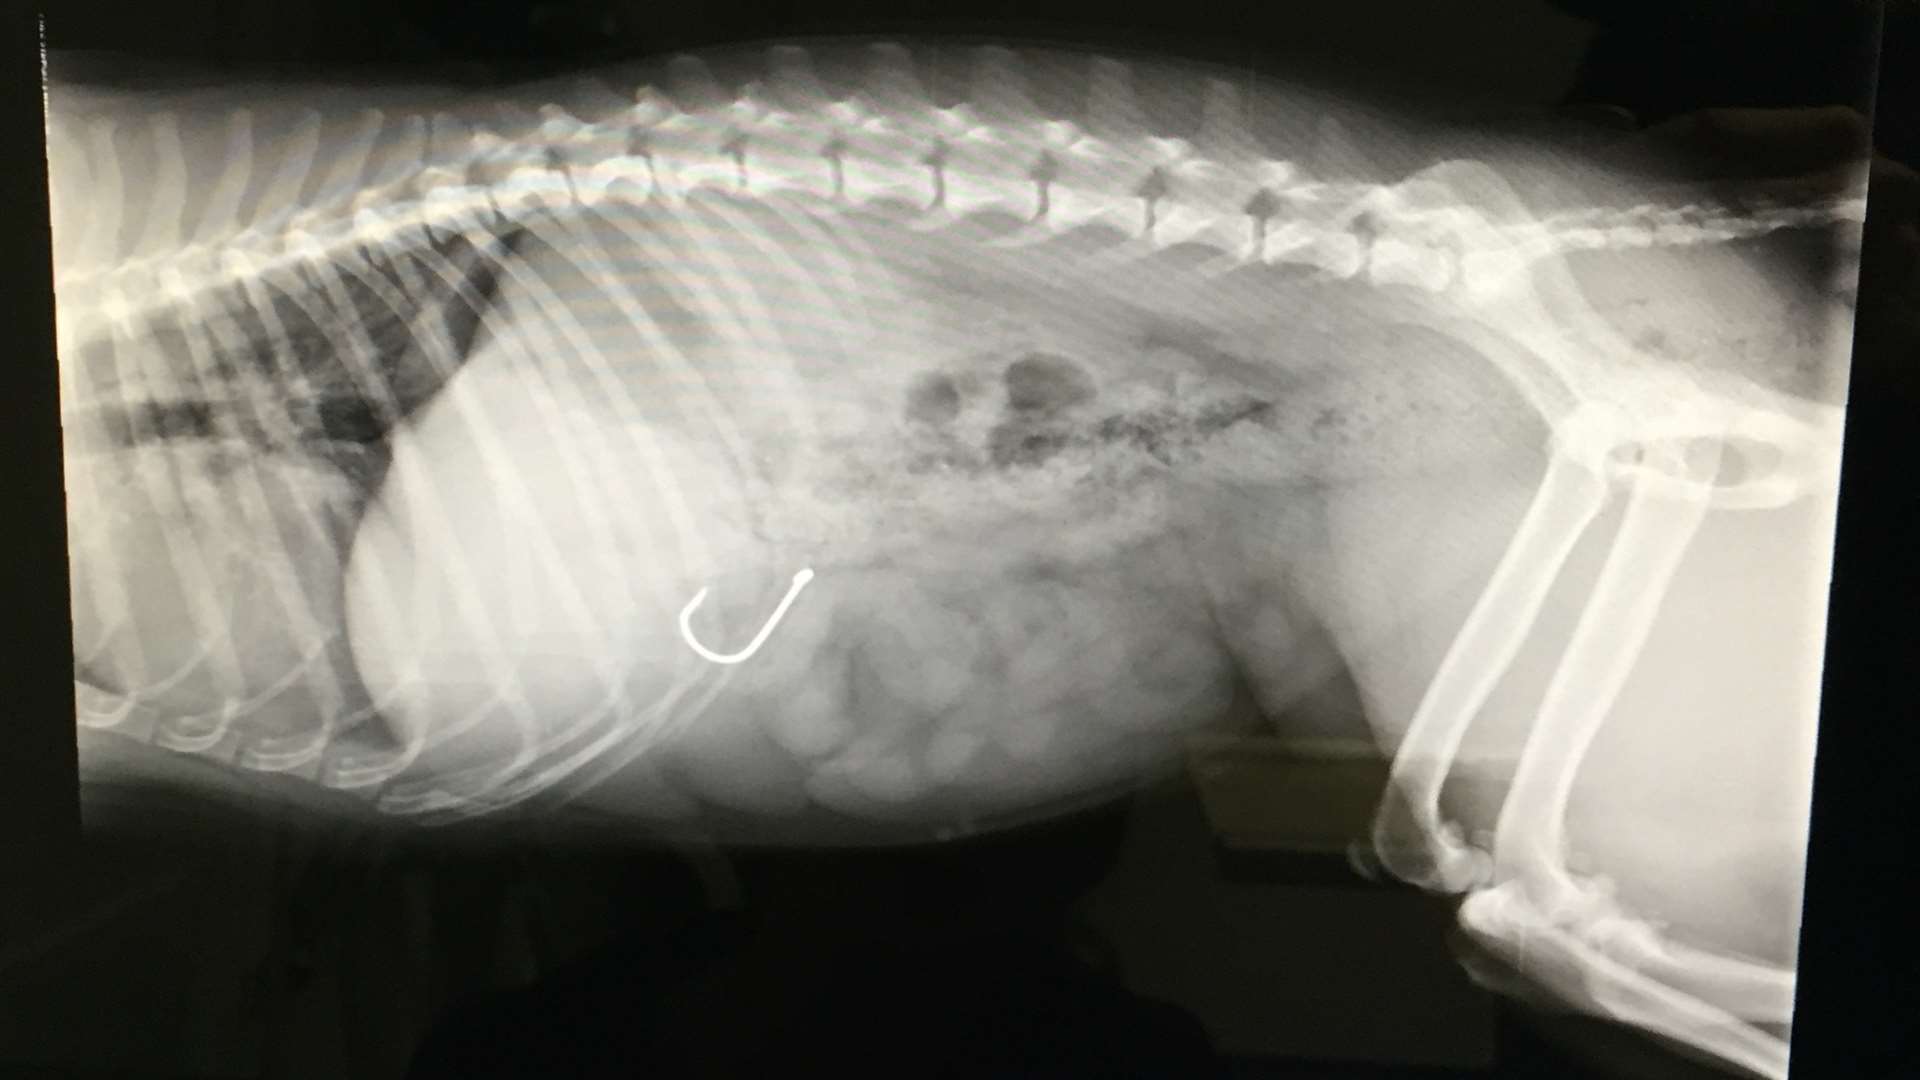 This X-ray shows the fish hook inside Jazmine